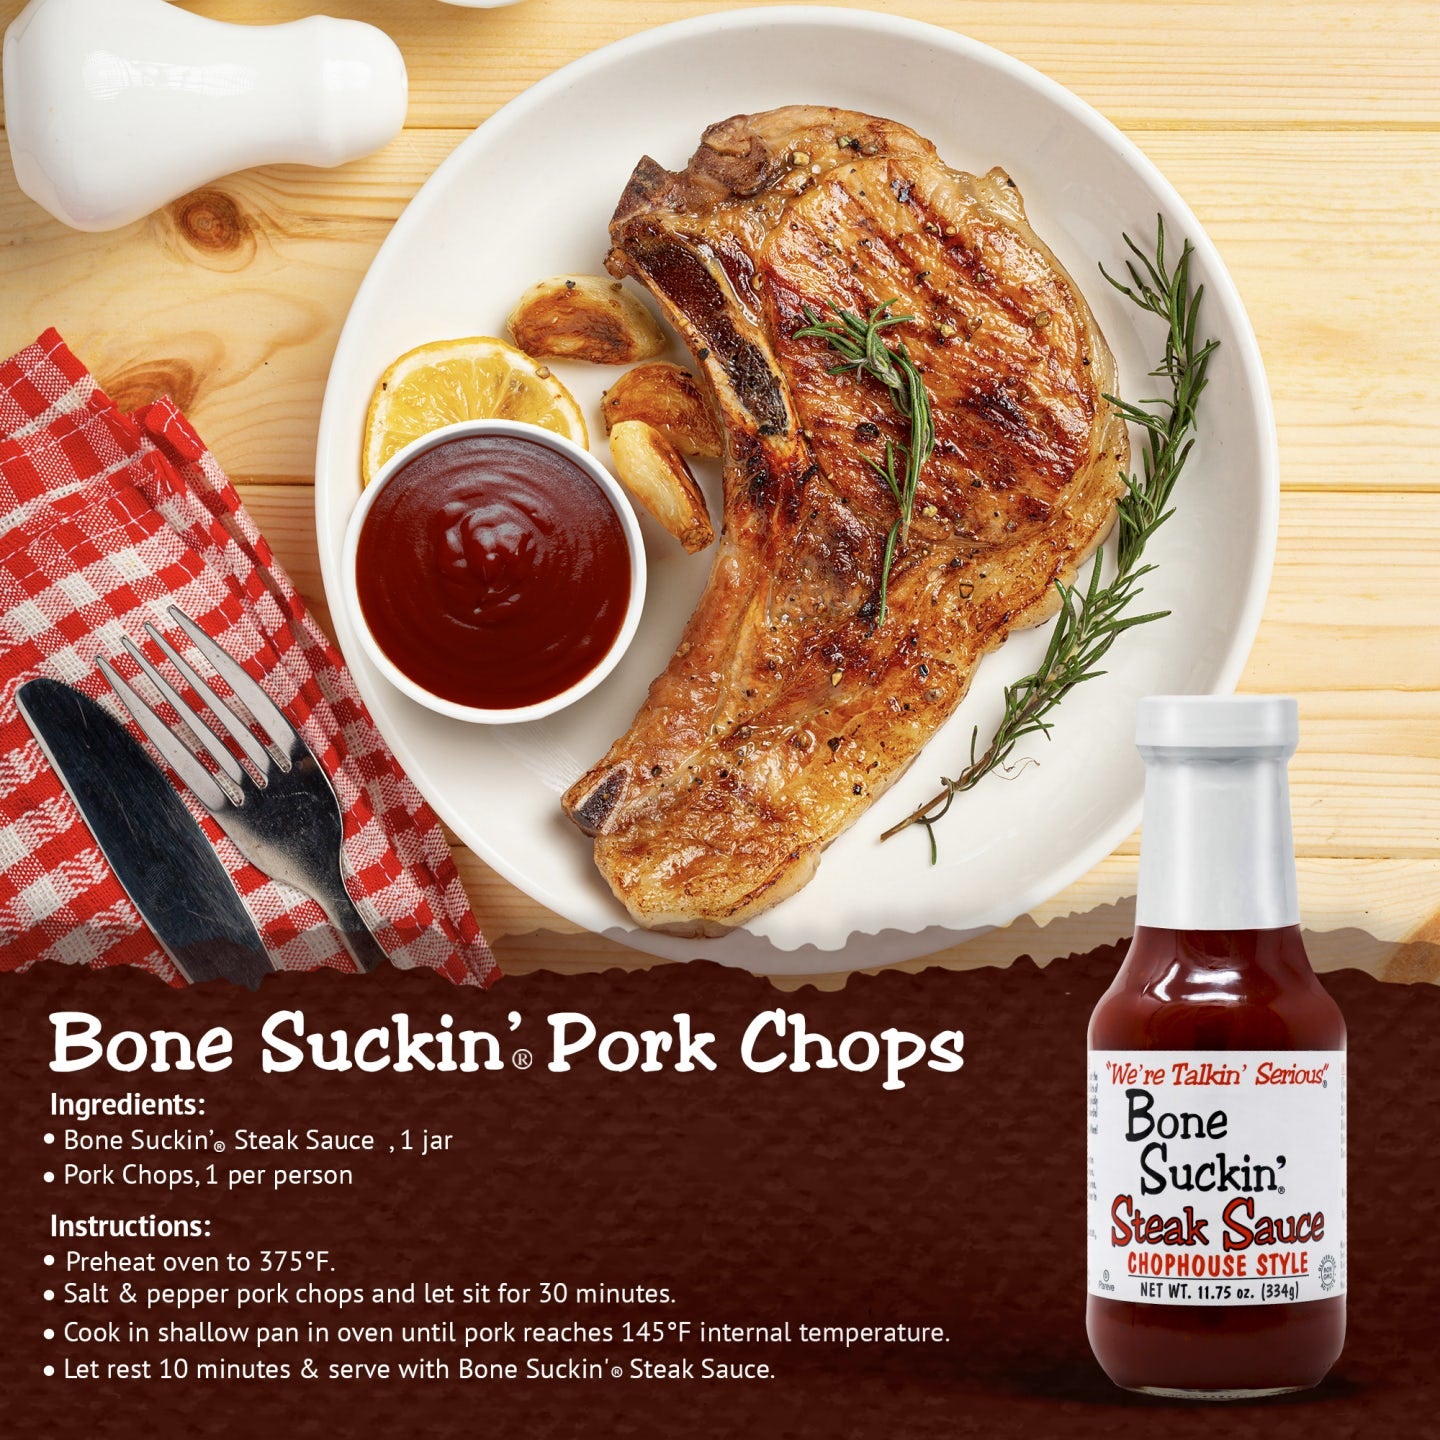 Bone Suckin' Steak Sauce, Pork Chops. Ingredients: Bone Suckin' Steak Sauce, 1 jar and 1 pork chop per person. Instructions: Preheat oven to 375°F. Salt and pepper pork chops and let sit for 30 minutes. Cook in shallow pan in oven until pork reaches 145°F internal temperature. Let rest 10 minutes and serve with Bone Suckin Steak Sauce.